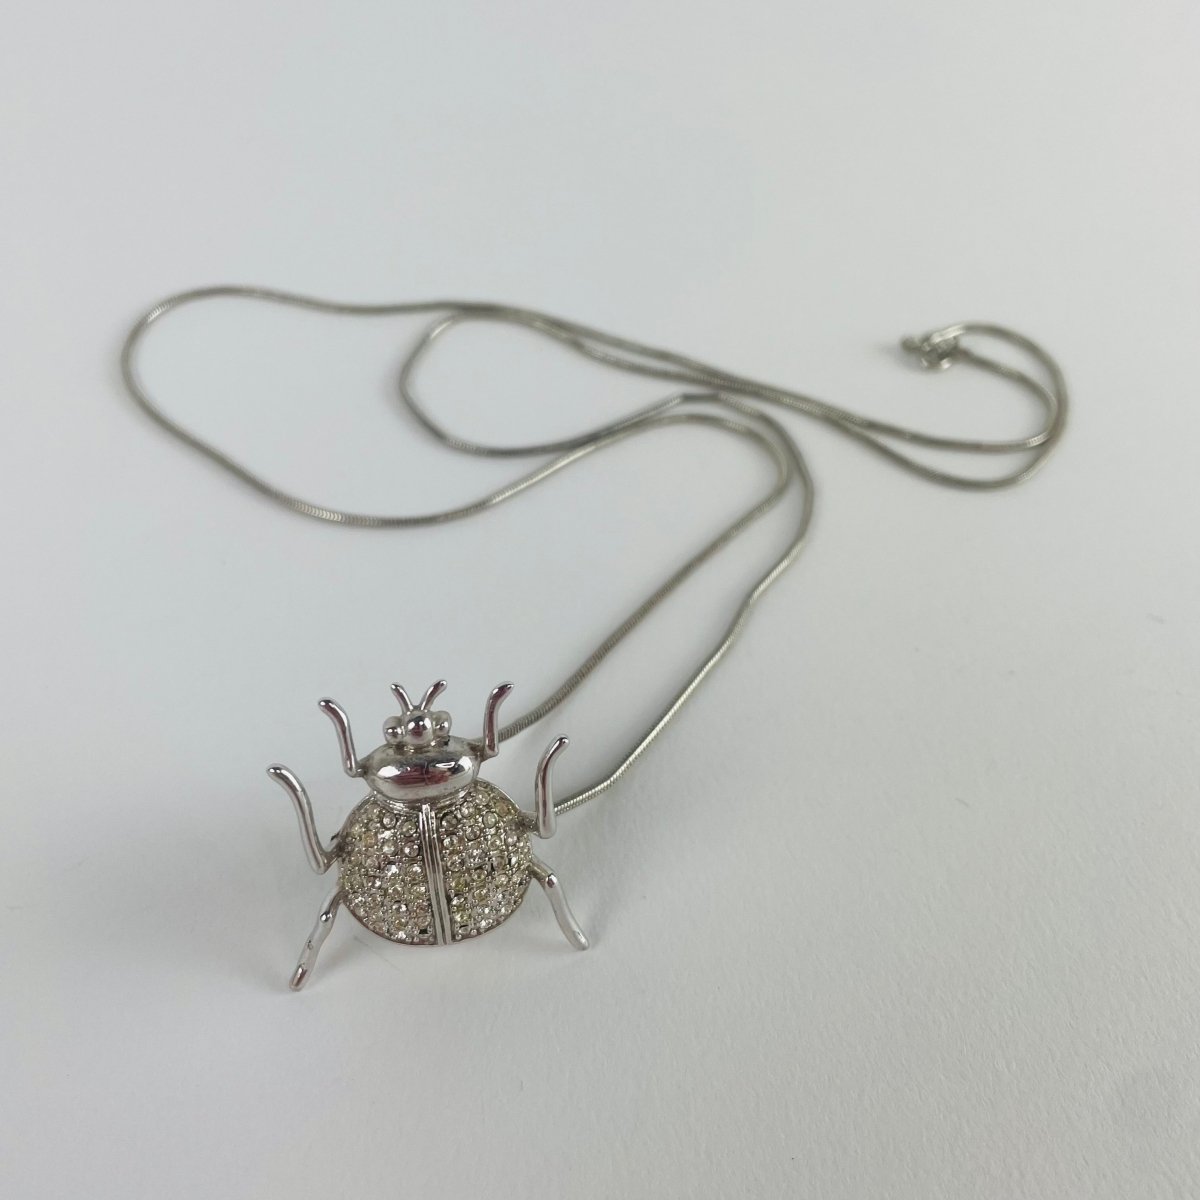 Silver Bejewelled Insect Necklace - Hart & Hive